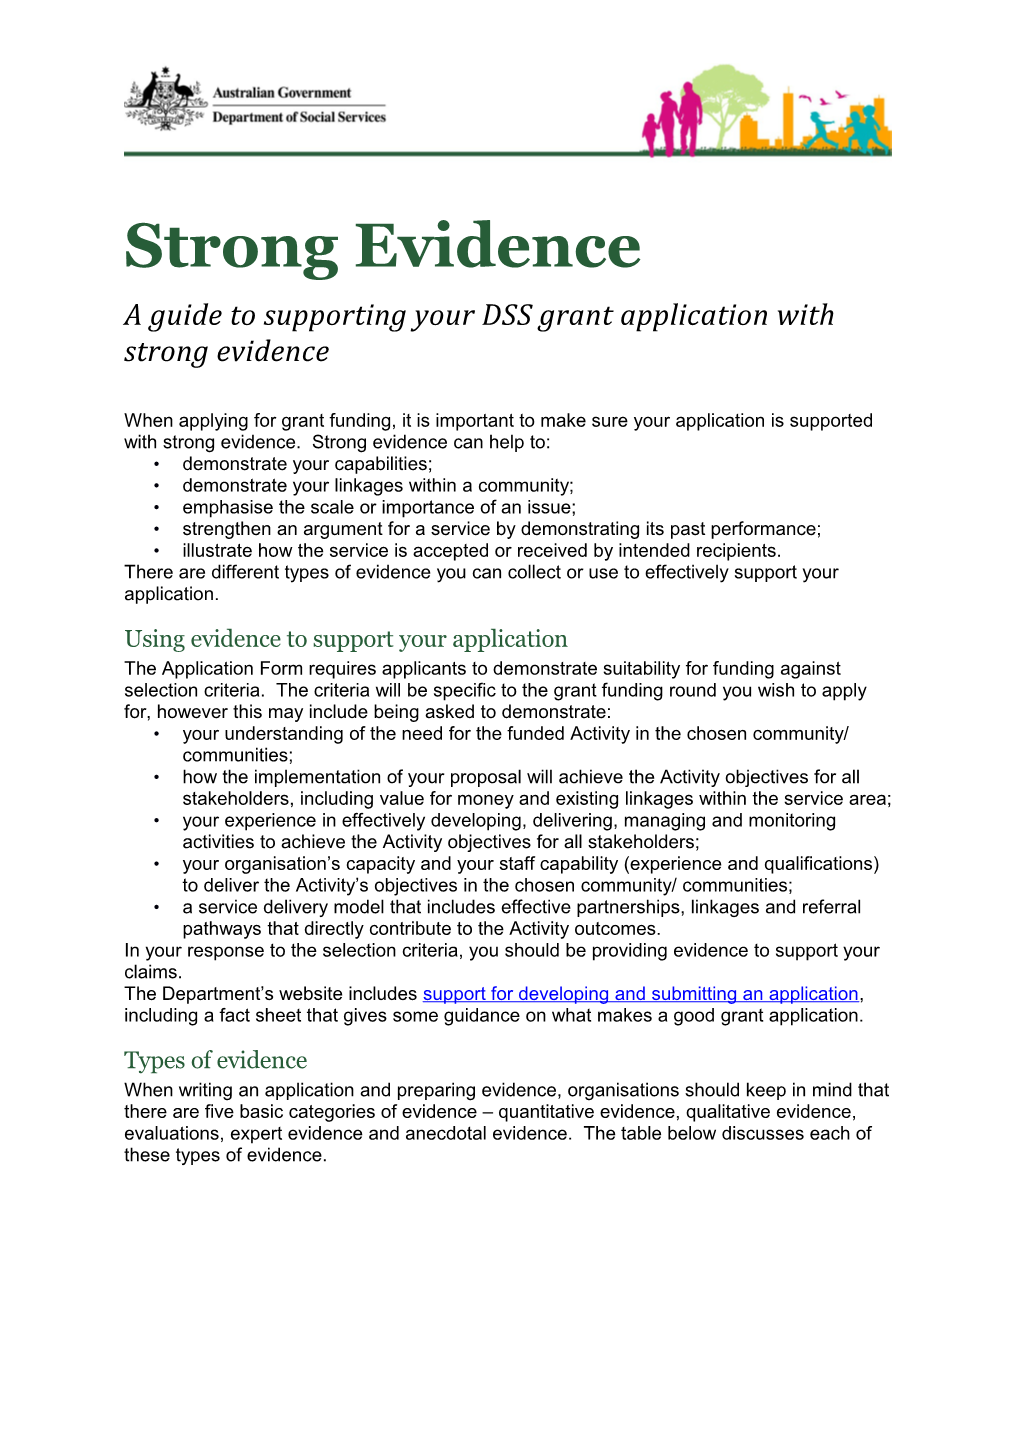 A Guide to Supporting Your DSS Grant Application with Strong Evidence